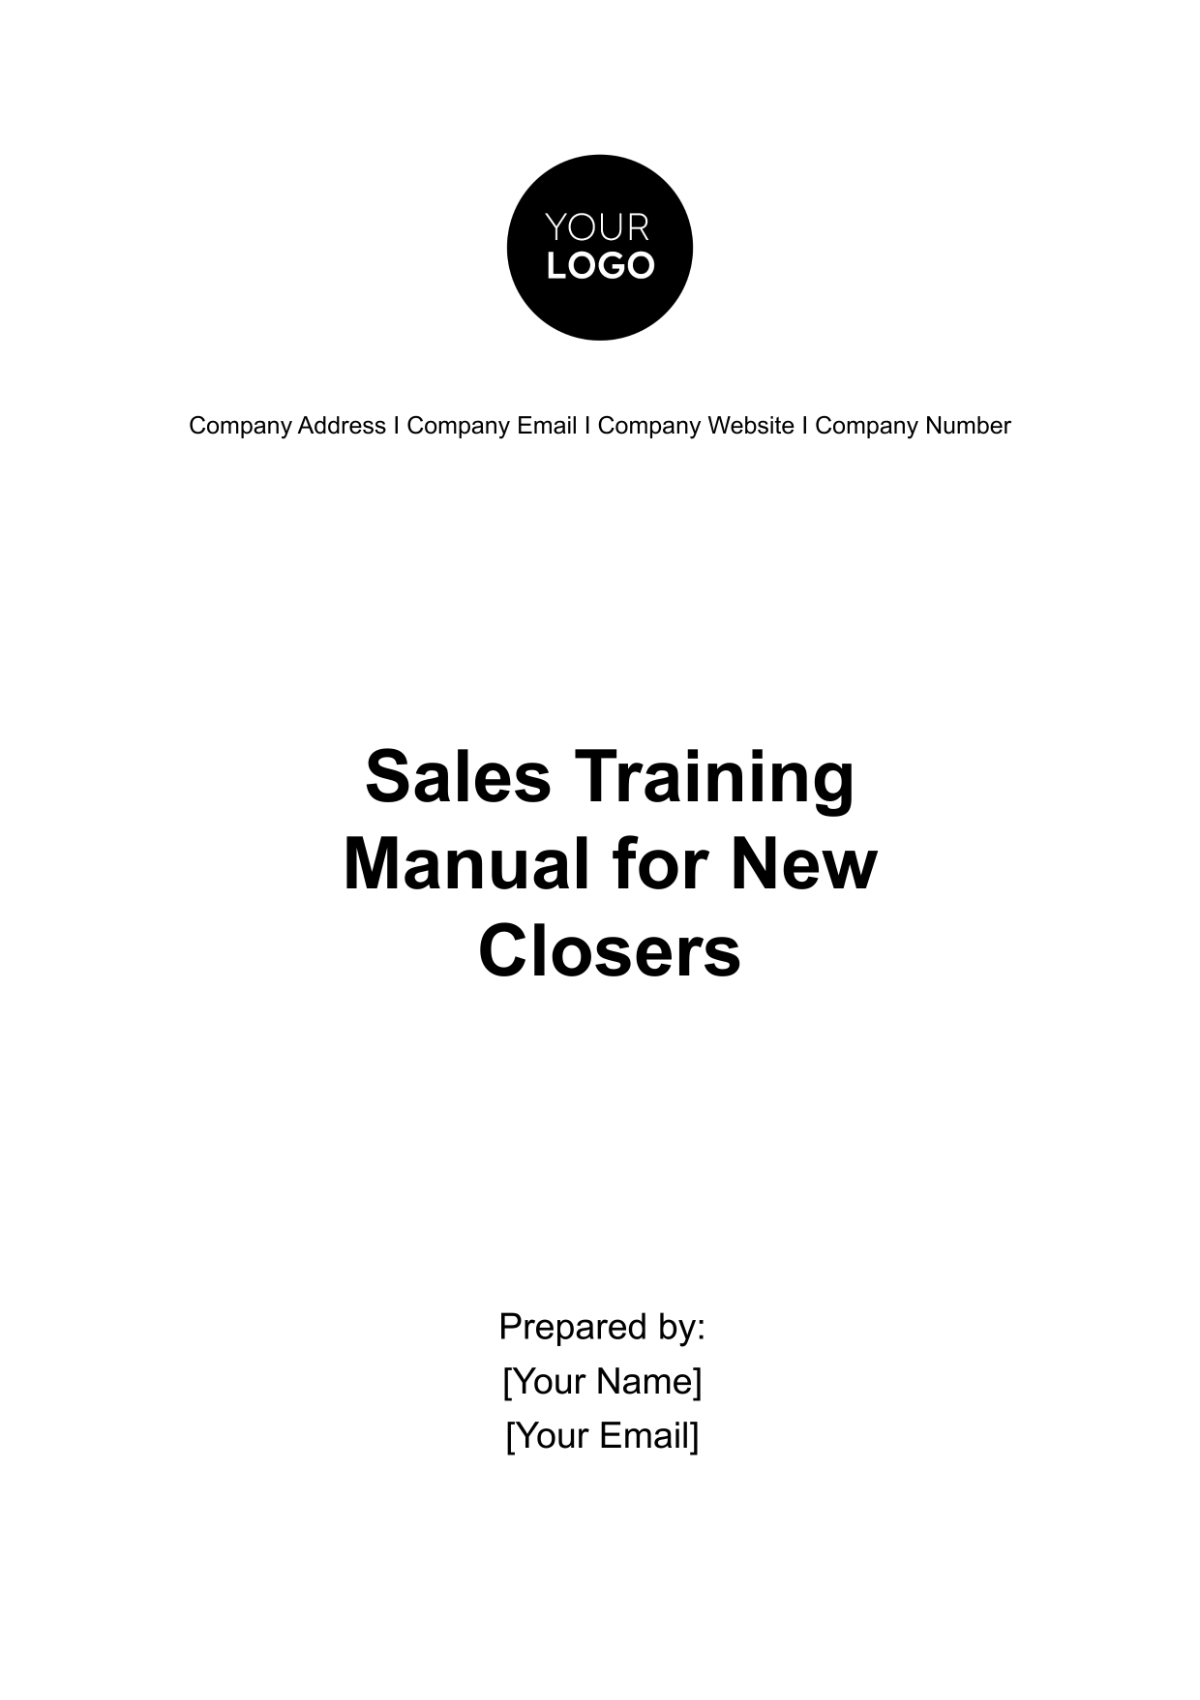 Sales Training Manual for New Closers Template